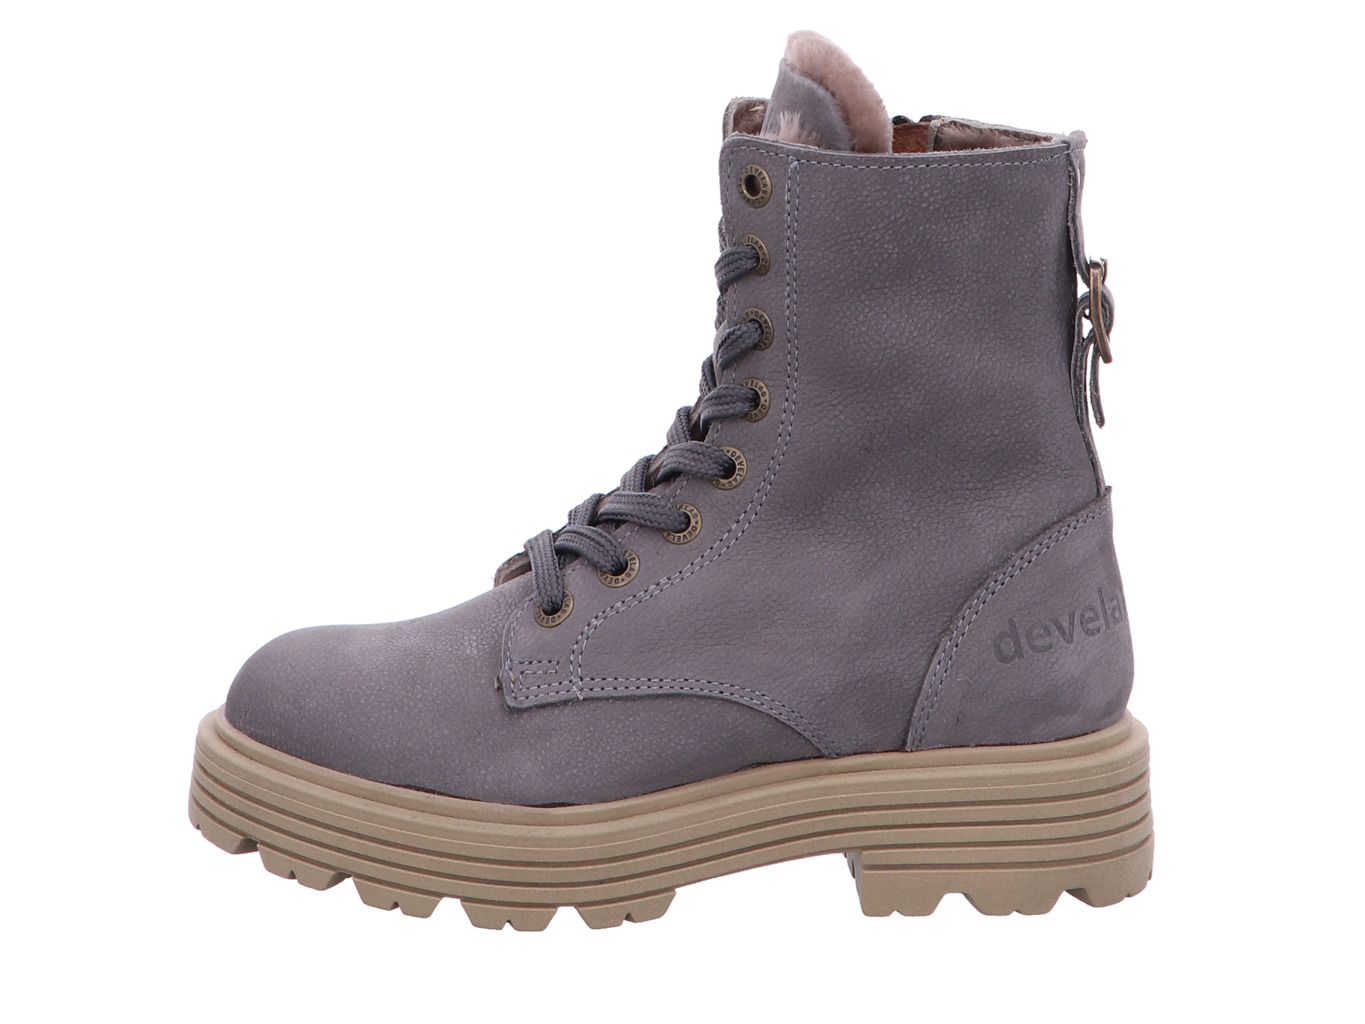 develab_girls_mid_boot_laces_42848_824_3196